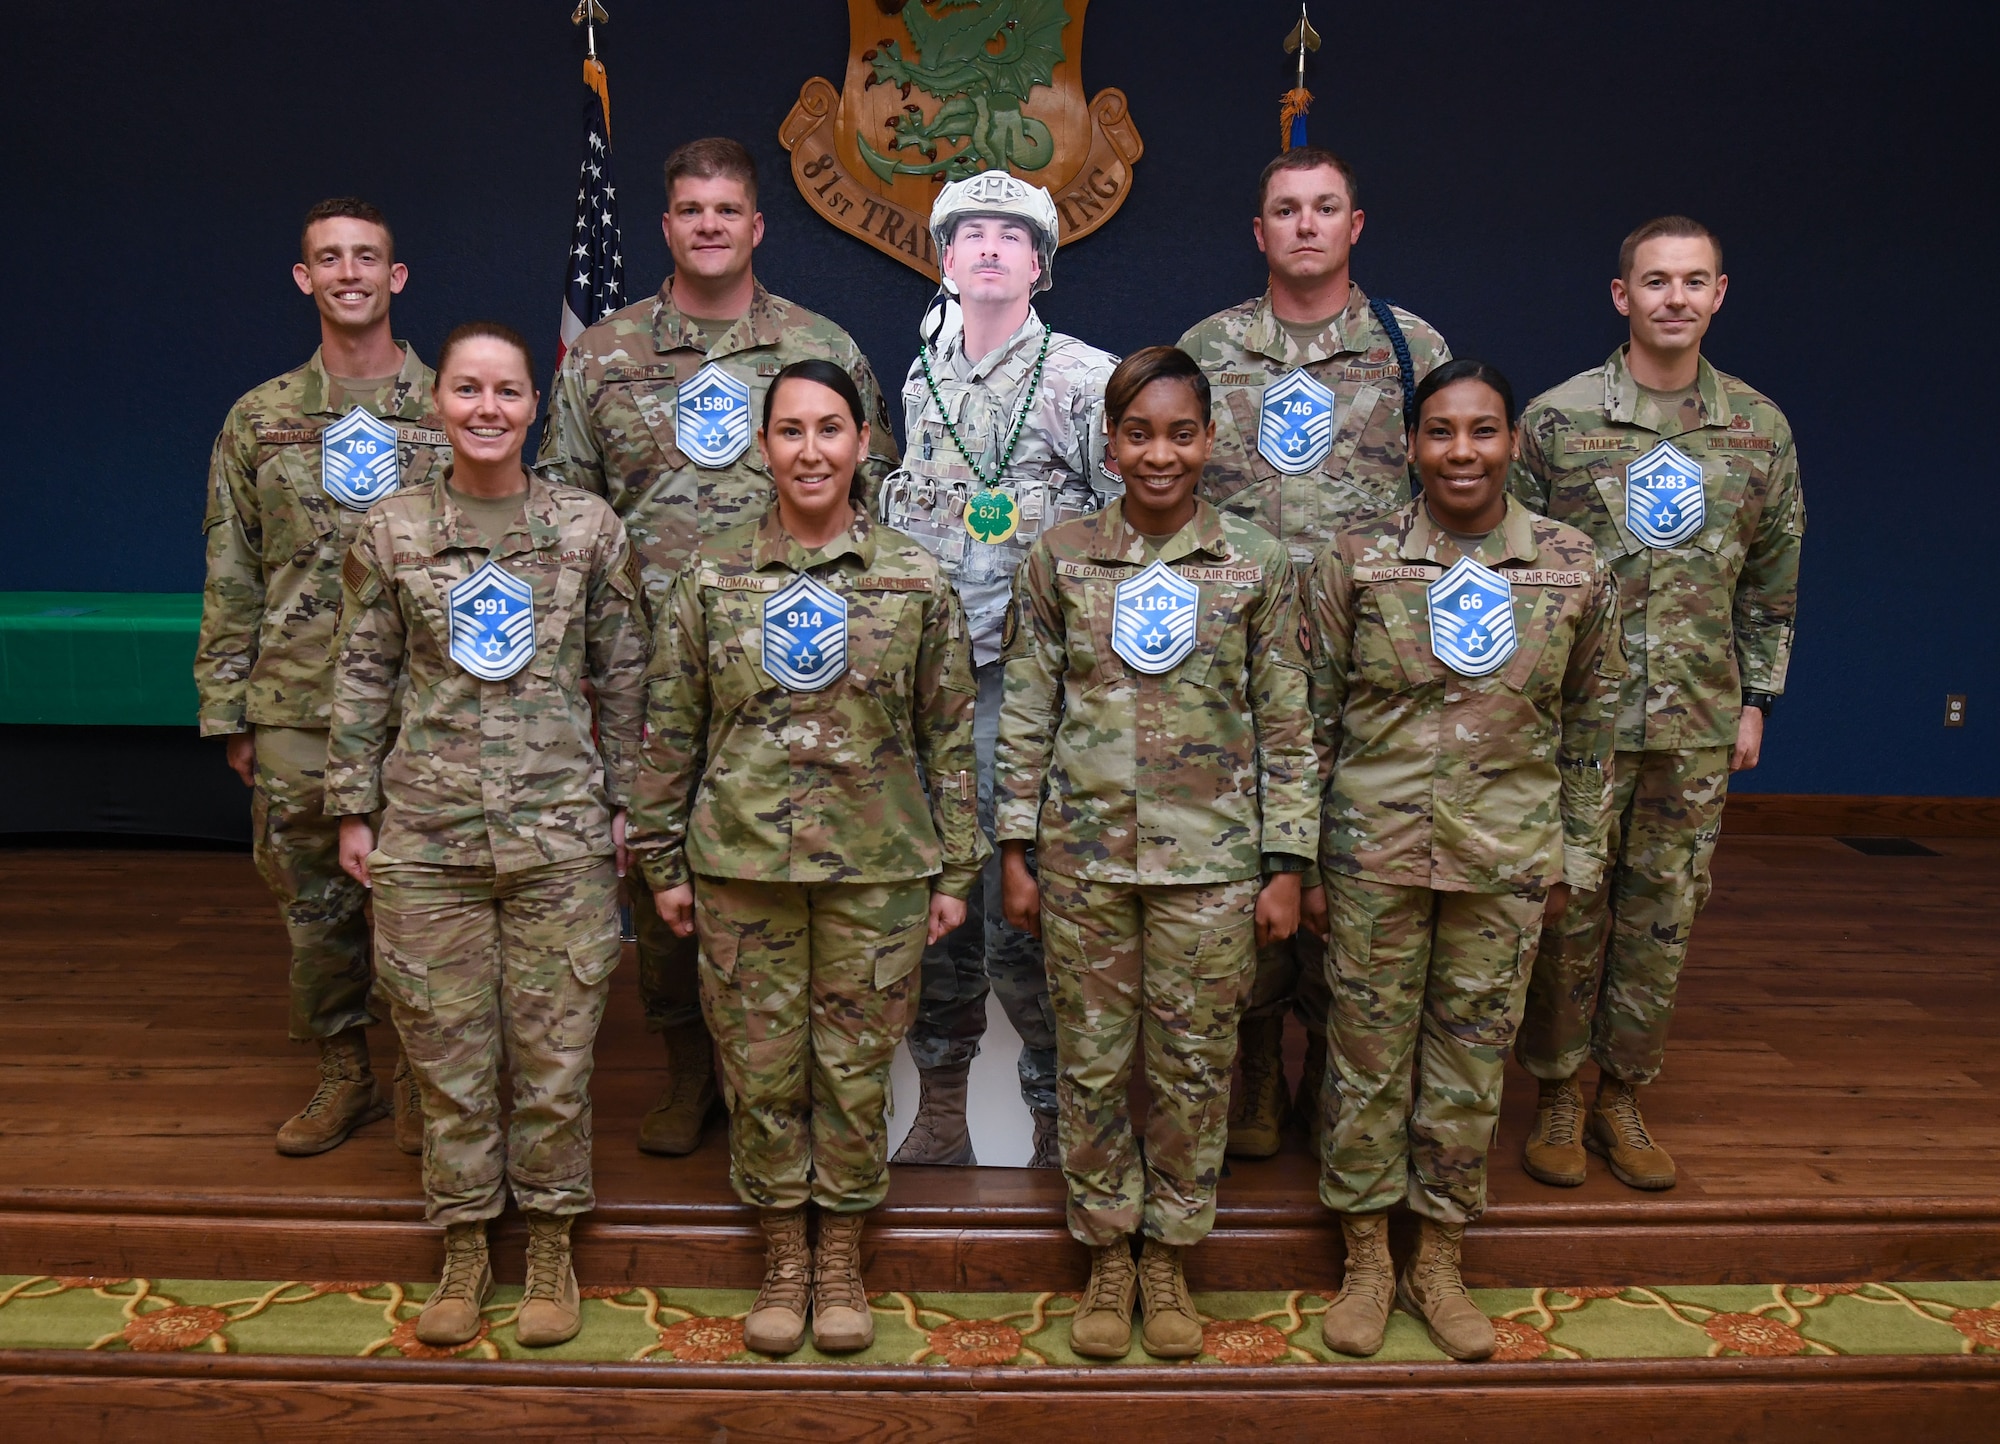 Keesler's newest senior master sergeants pose for a group photo during the Senior Master Sergeant Promotion Release Ceremony inside the Bay Breeze Event Center at Keesler Air Force Base, Mississippi, March 17, 2023.